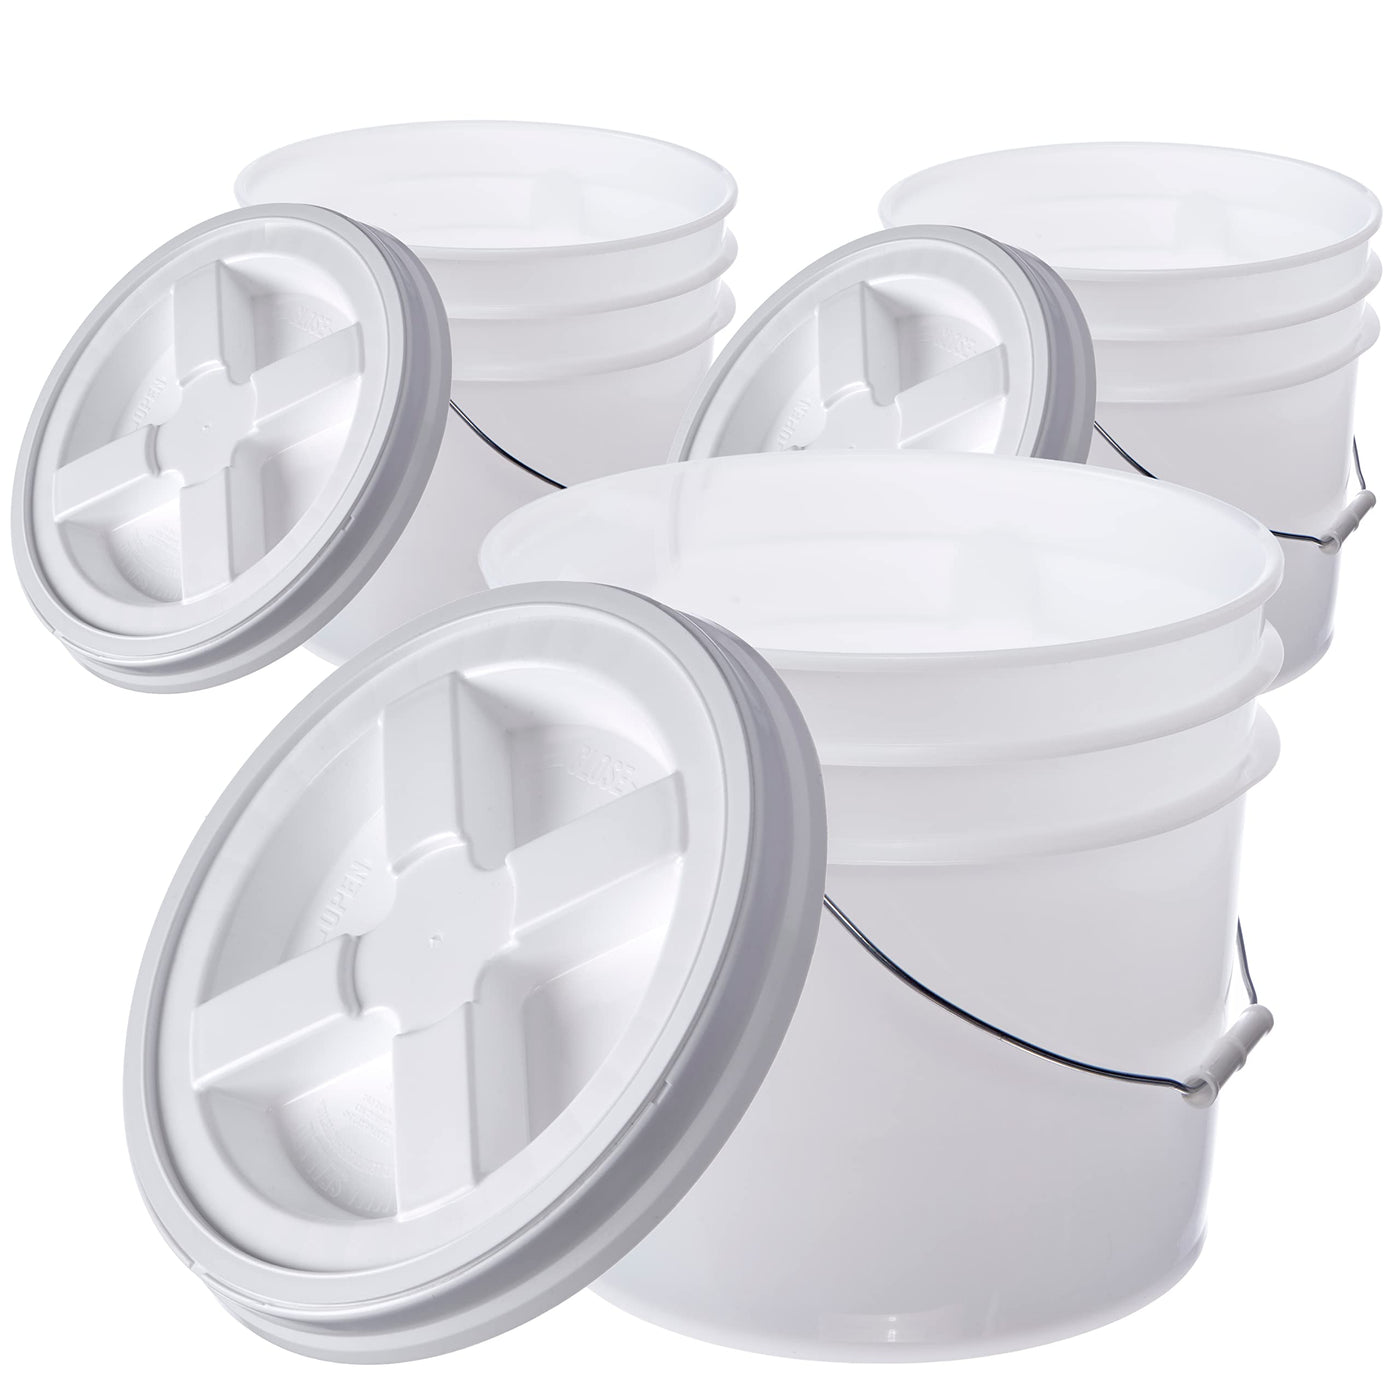 3.5 Gallon Buckets With Gamma Seal Lids, Free Shipping